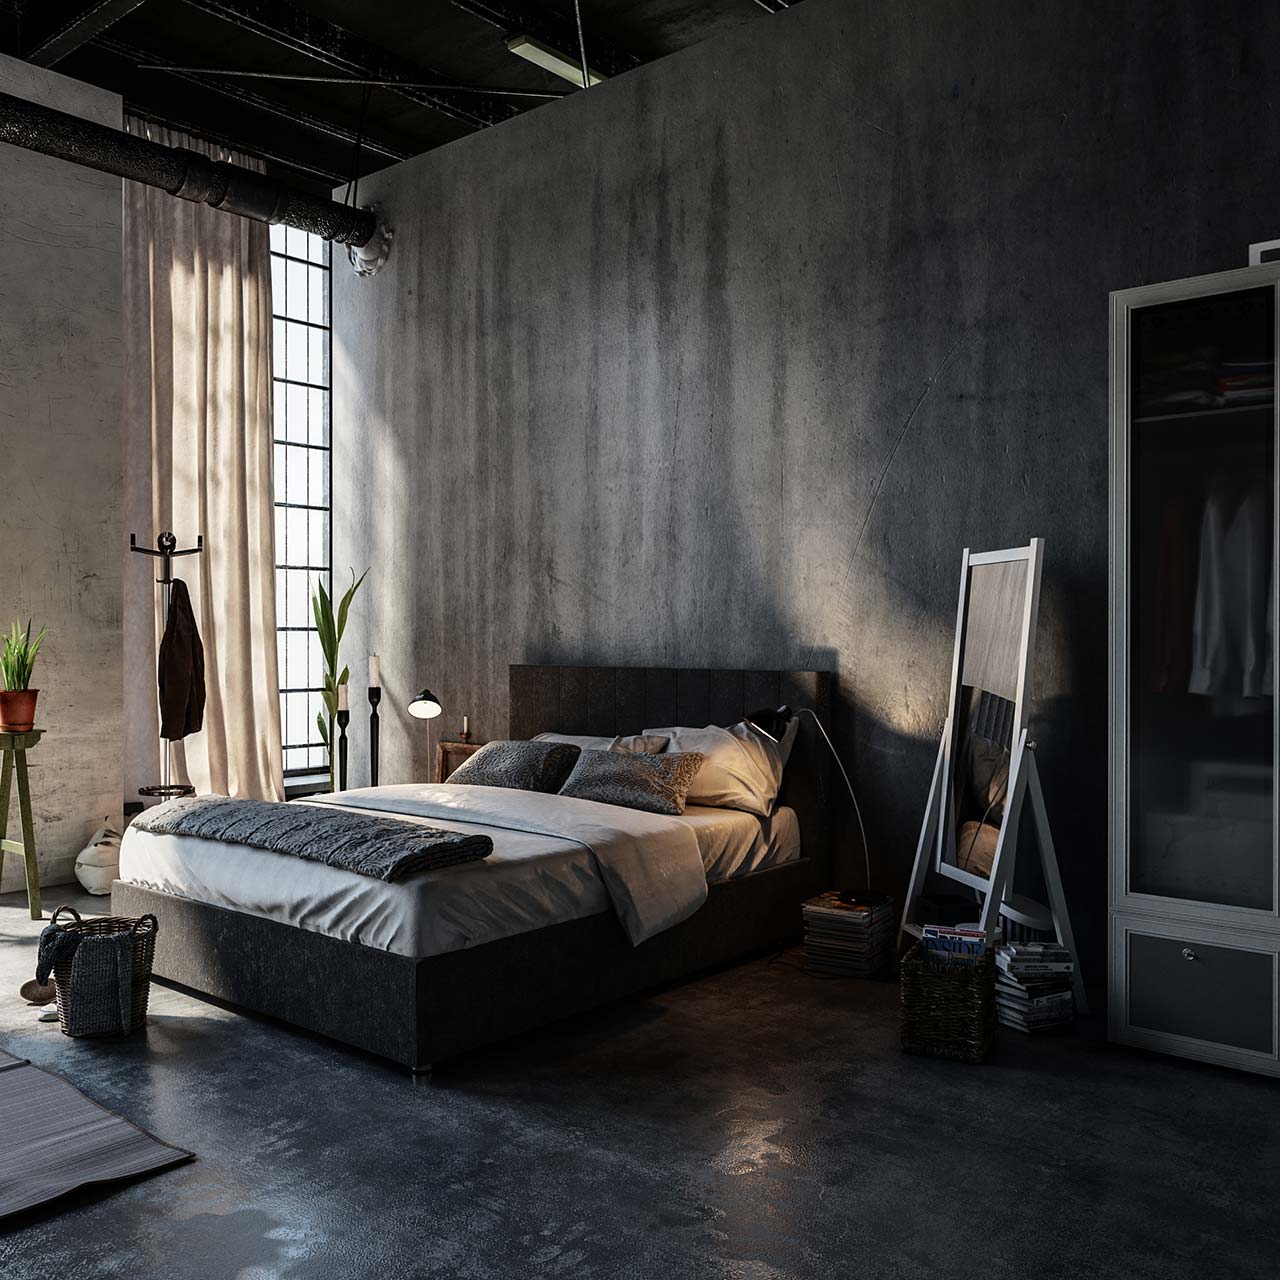 Bedroom urban wall modern decor style men industrial chic minimalist cool grey amazing idea wallpaper decorated touches even interior room